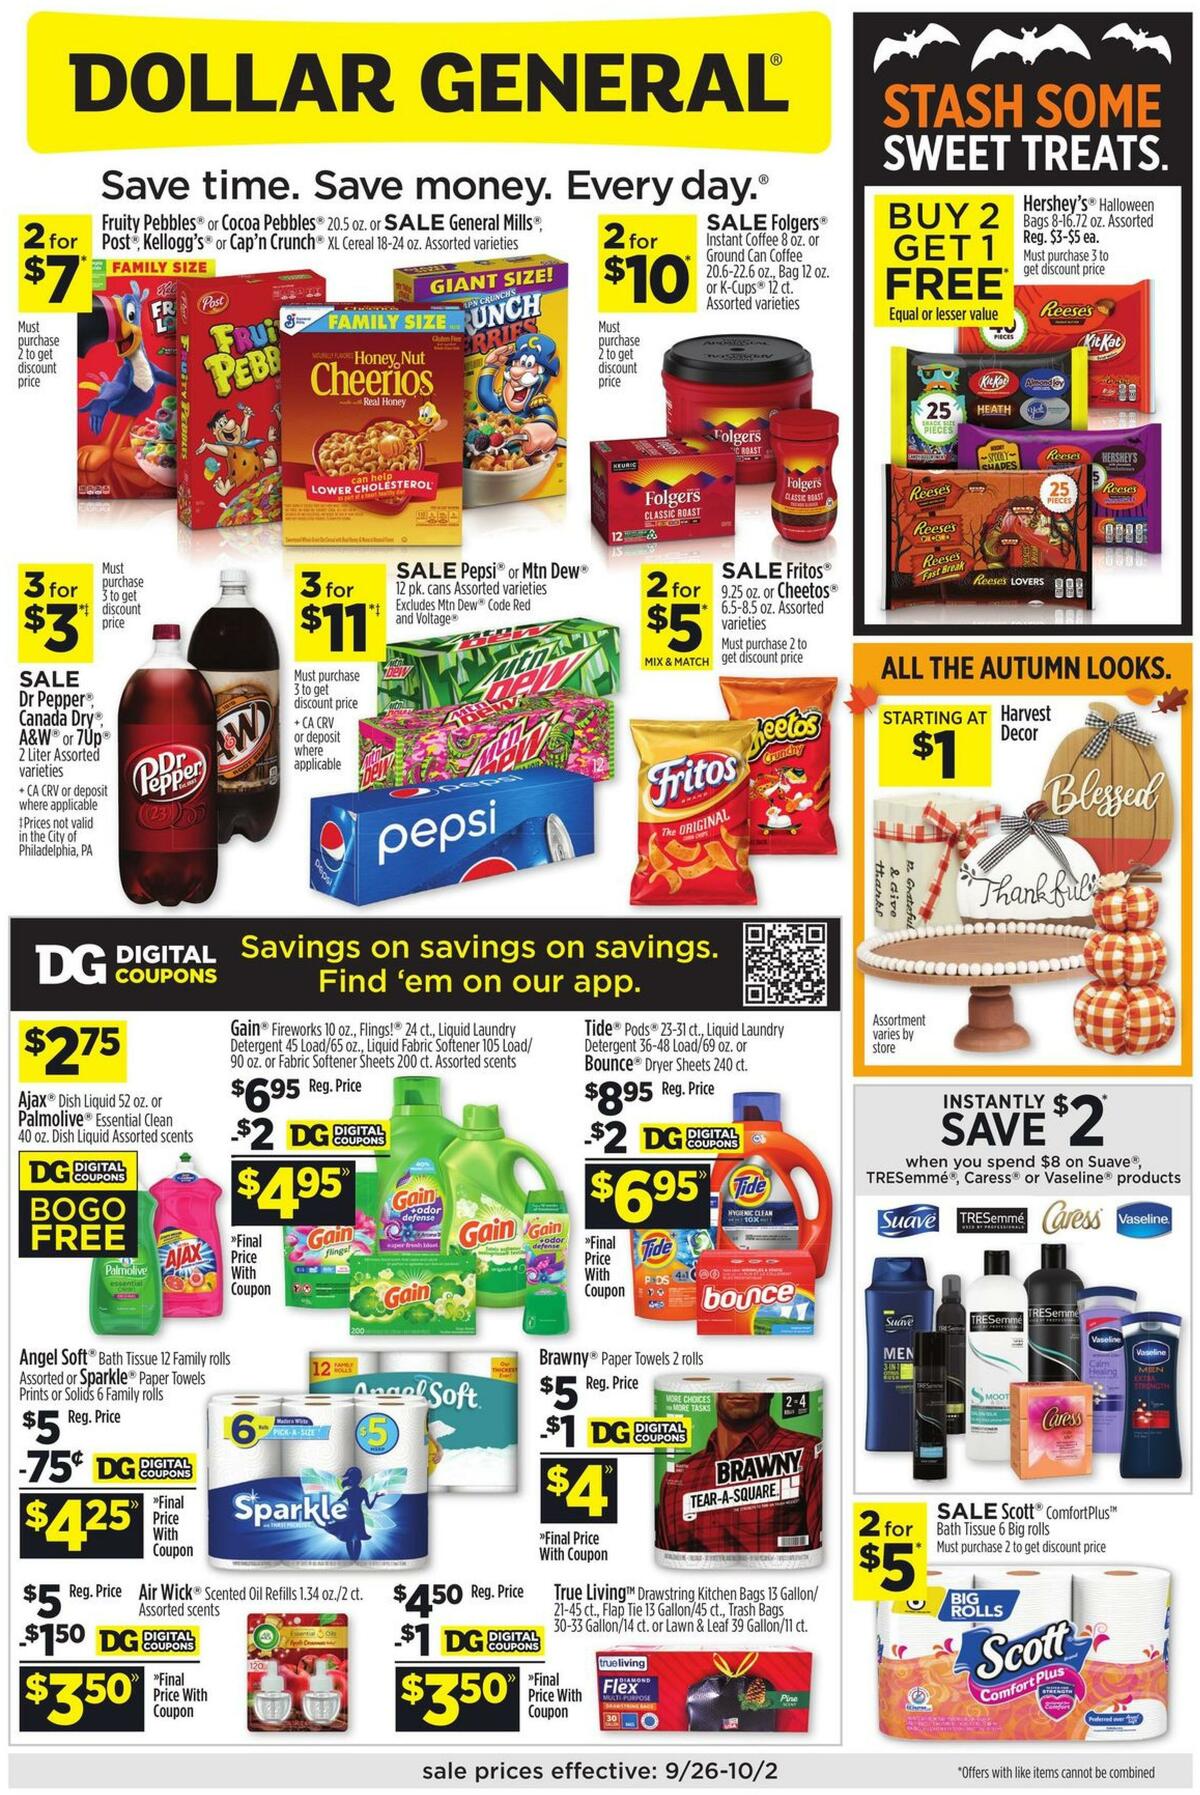 Dollar General Weekly Ad from September 26